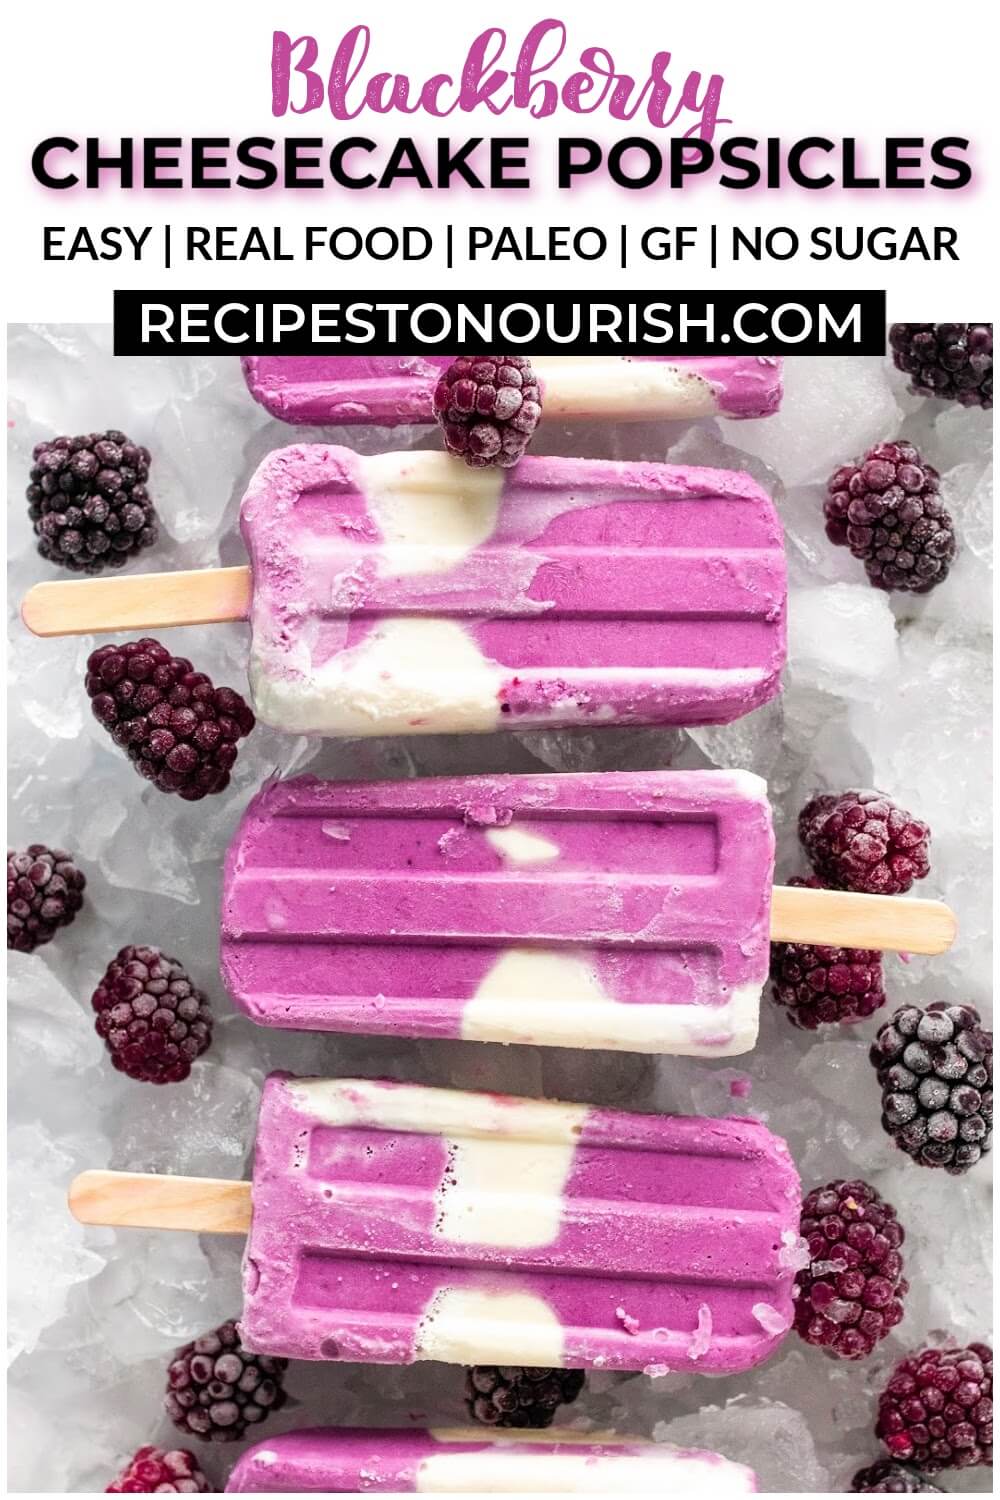 Creamy and purple swirled homemade popsicles sitting on ice next to blackberries.